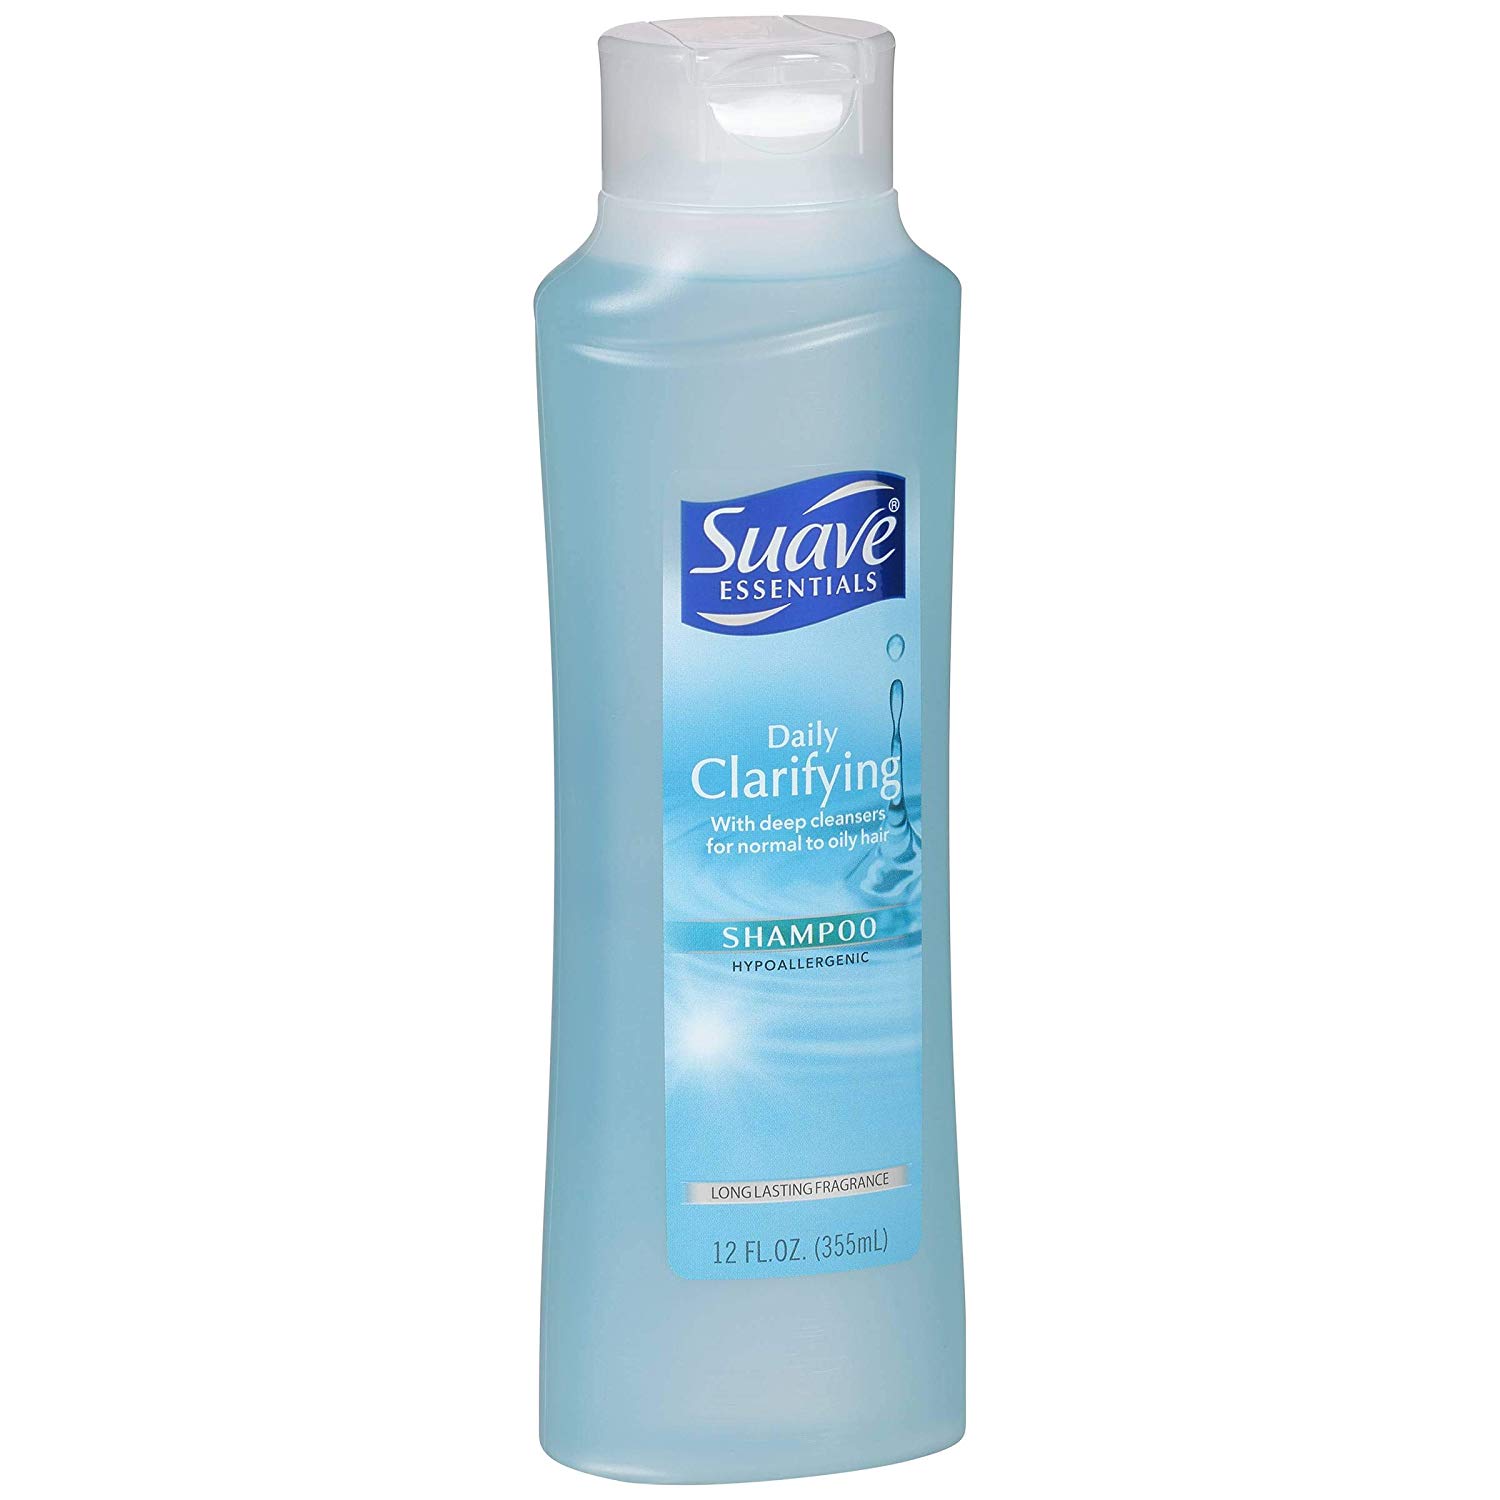 Suave Shampoo for Oily Hair Complete Reviews